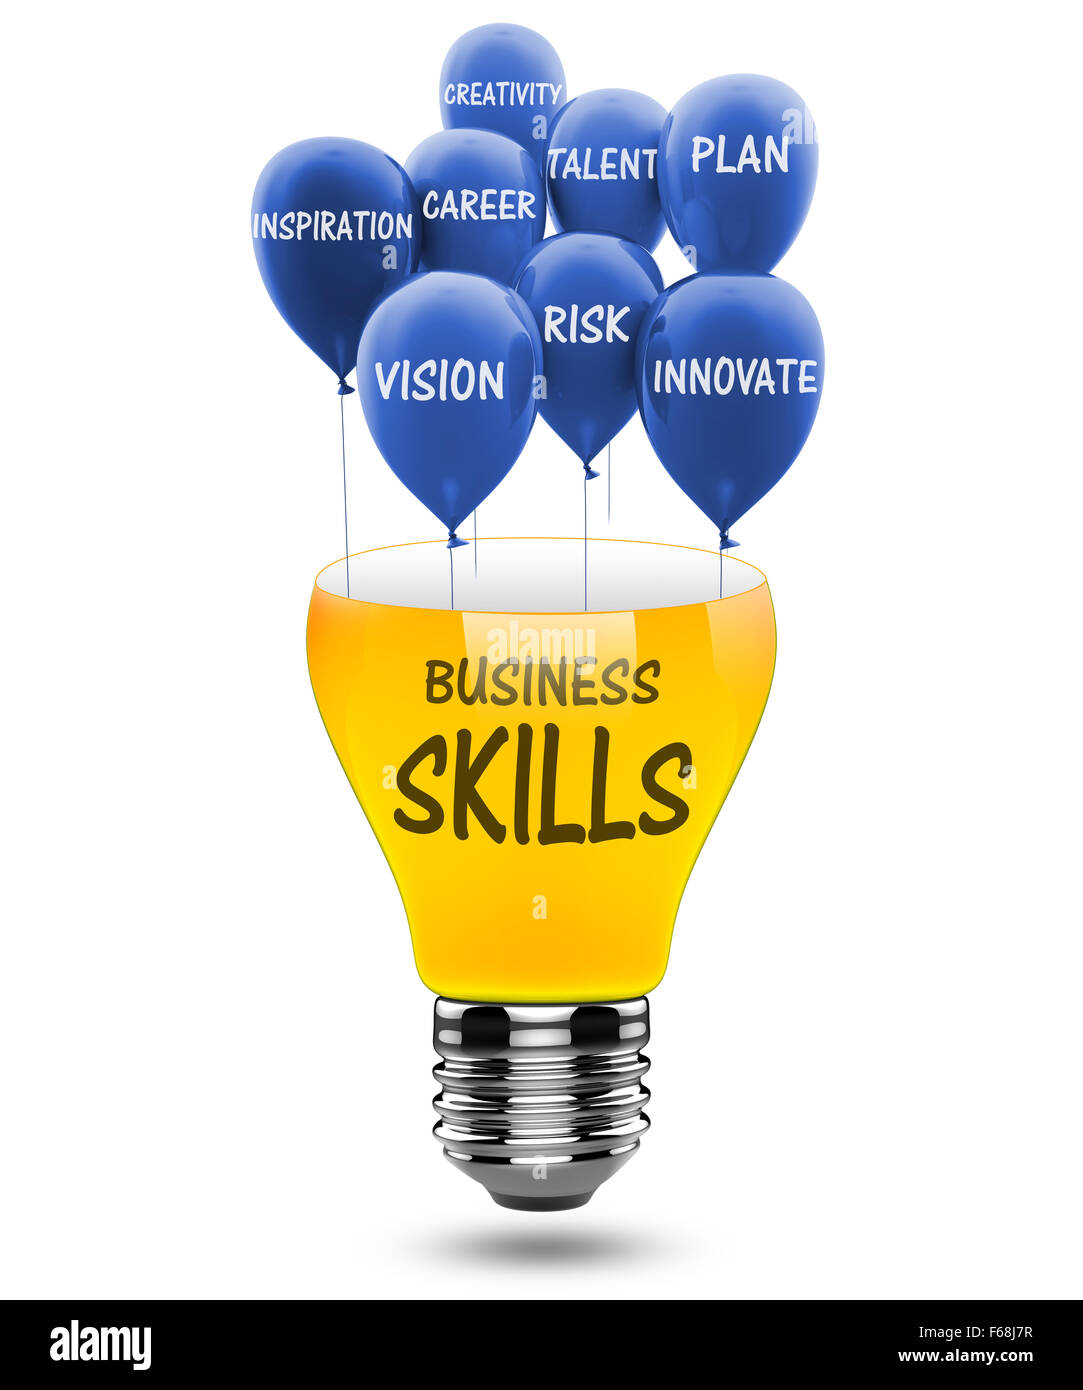 Ideas, skills and knowledge as a concept Stock Photo